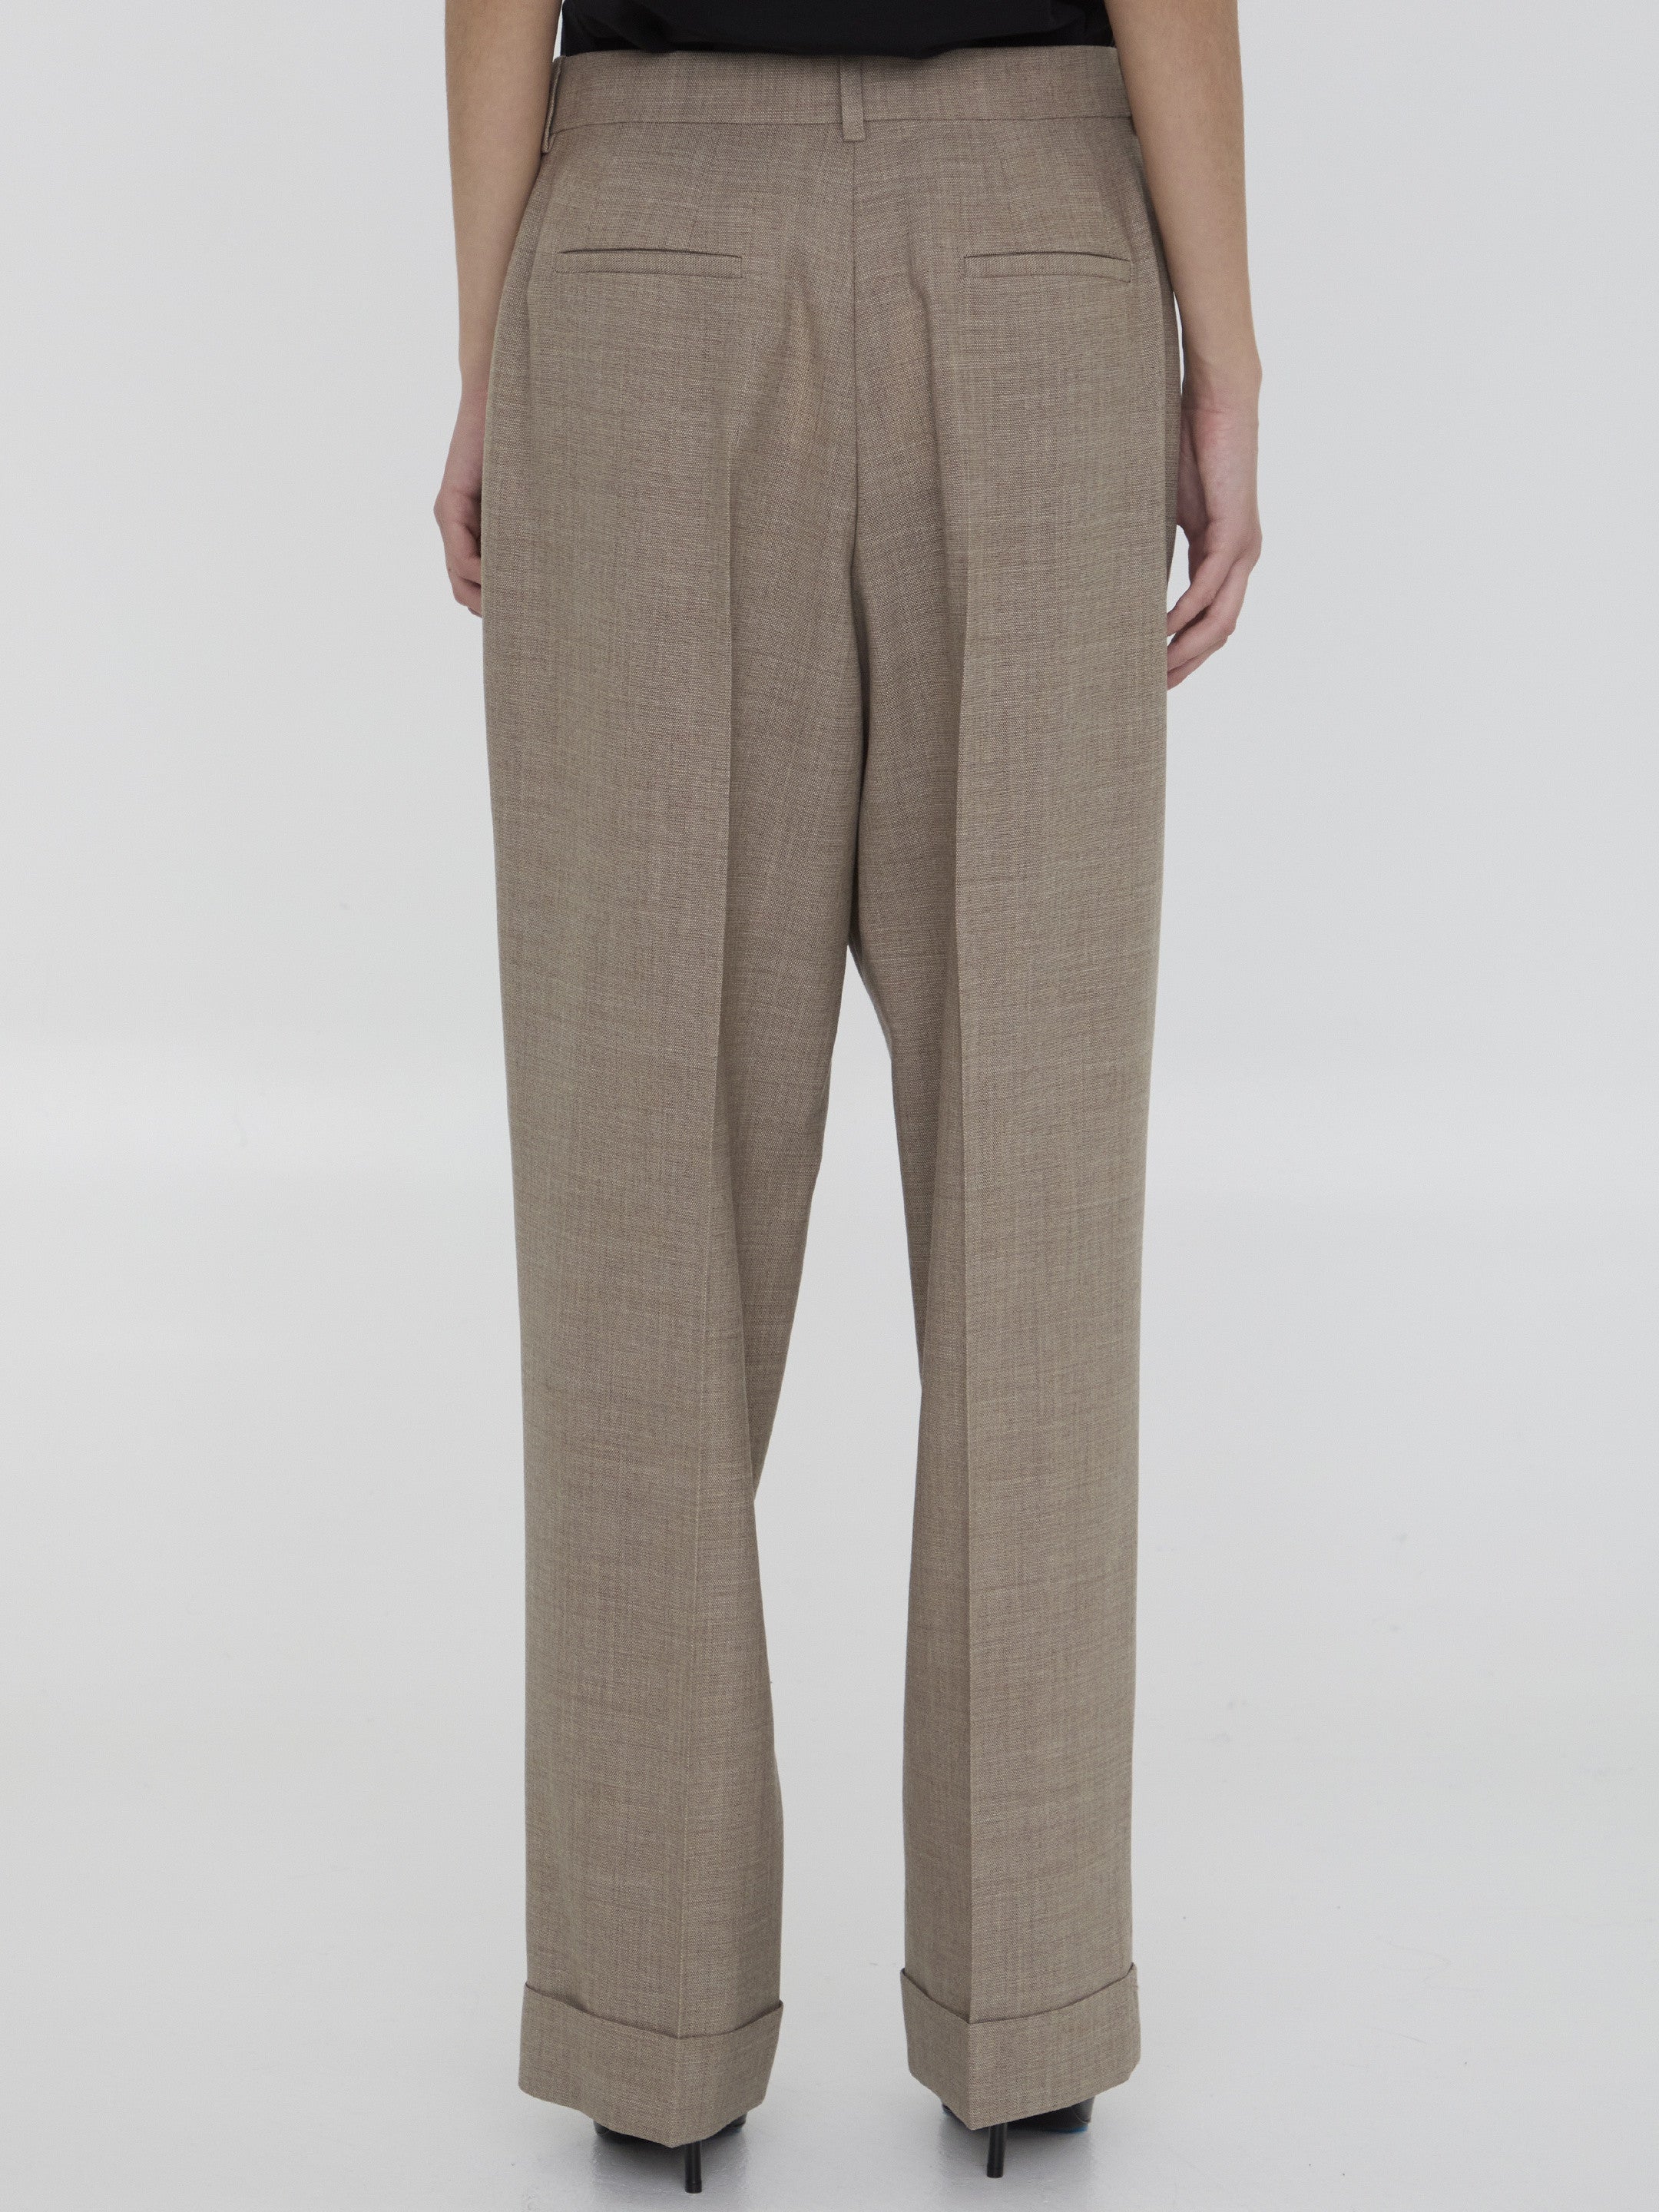 Tor trousers